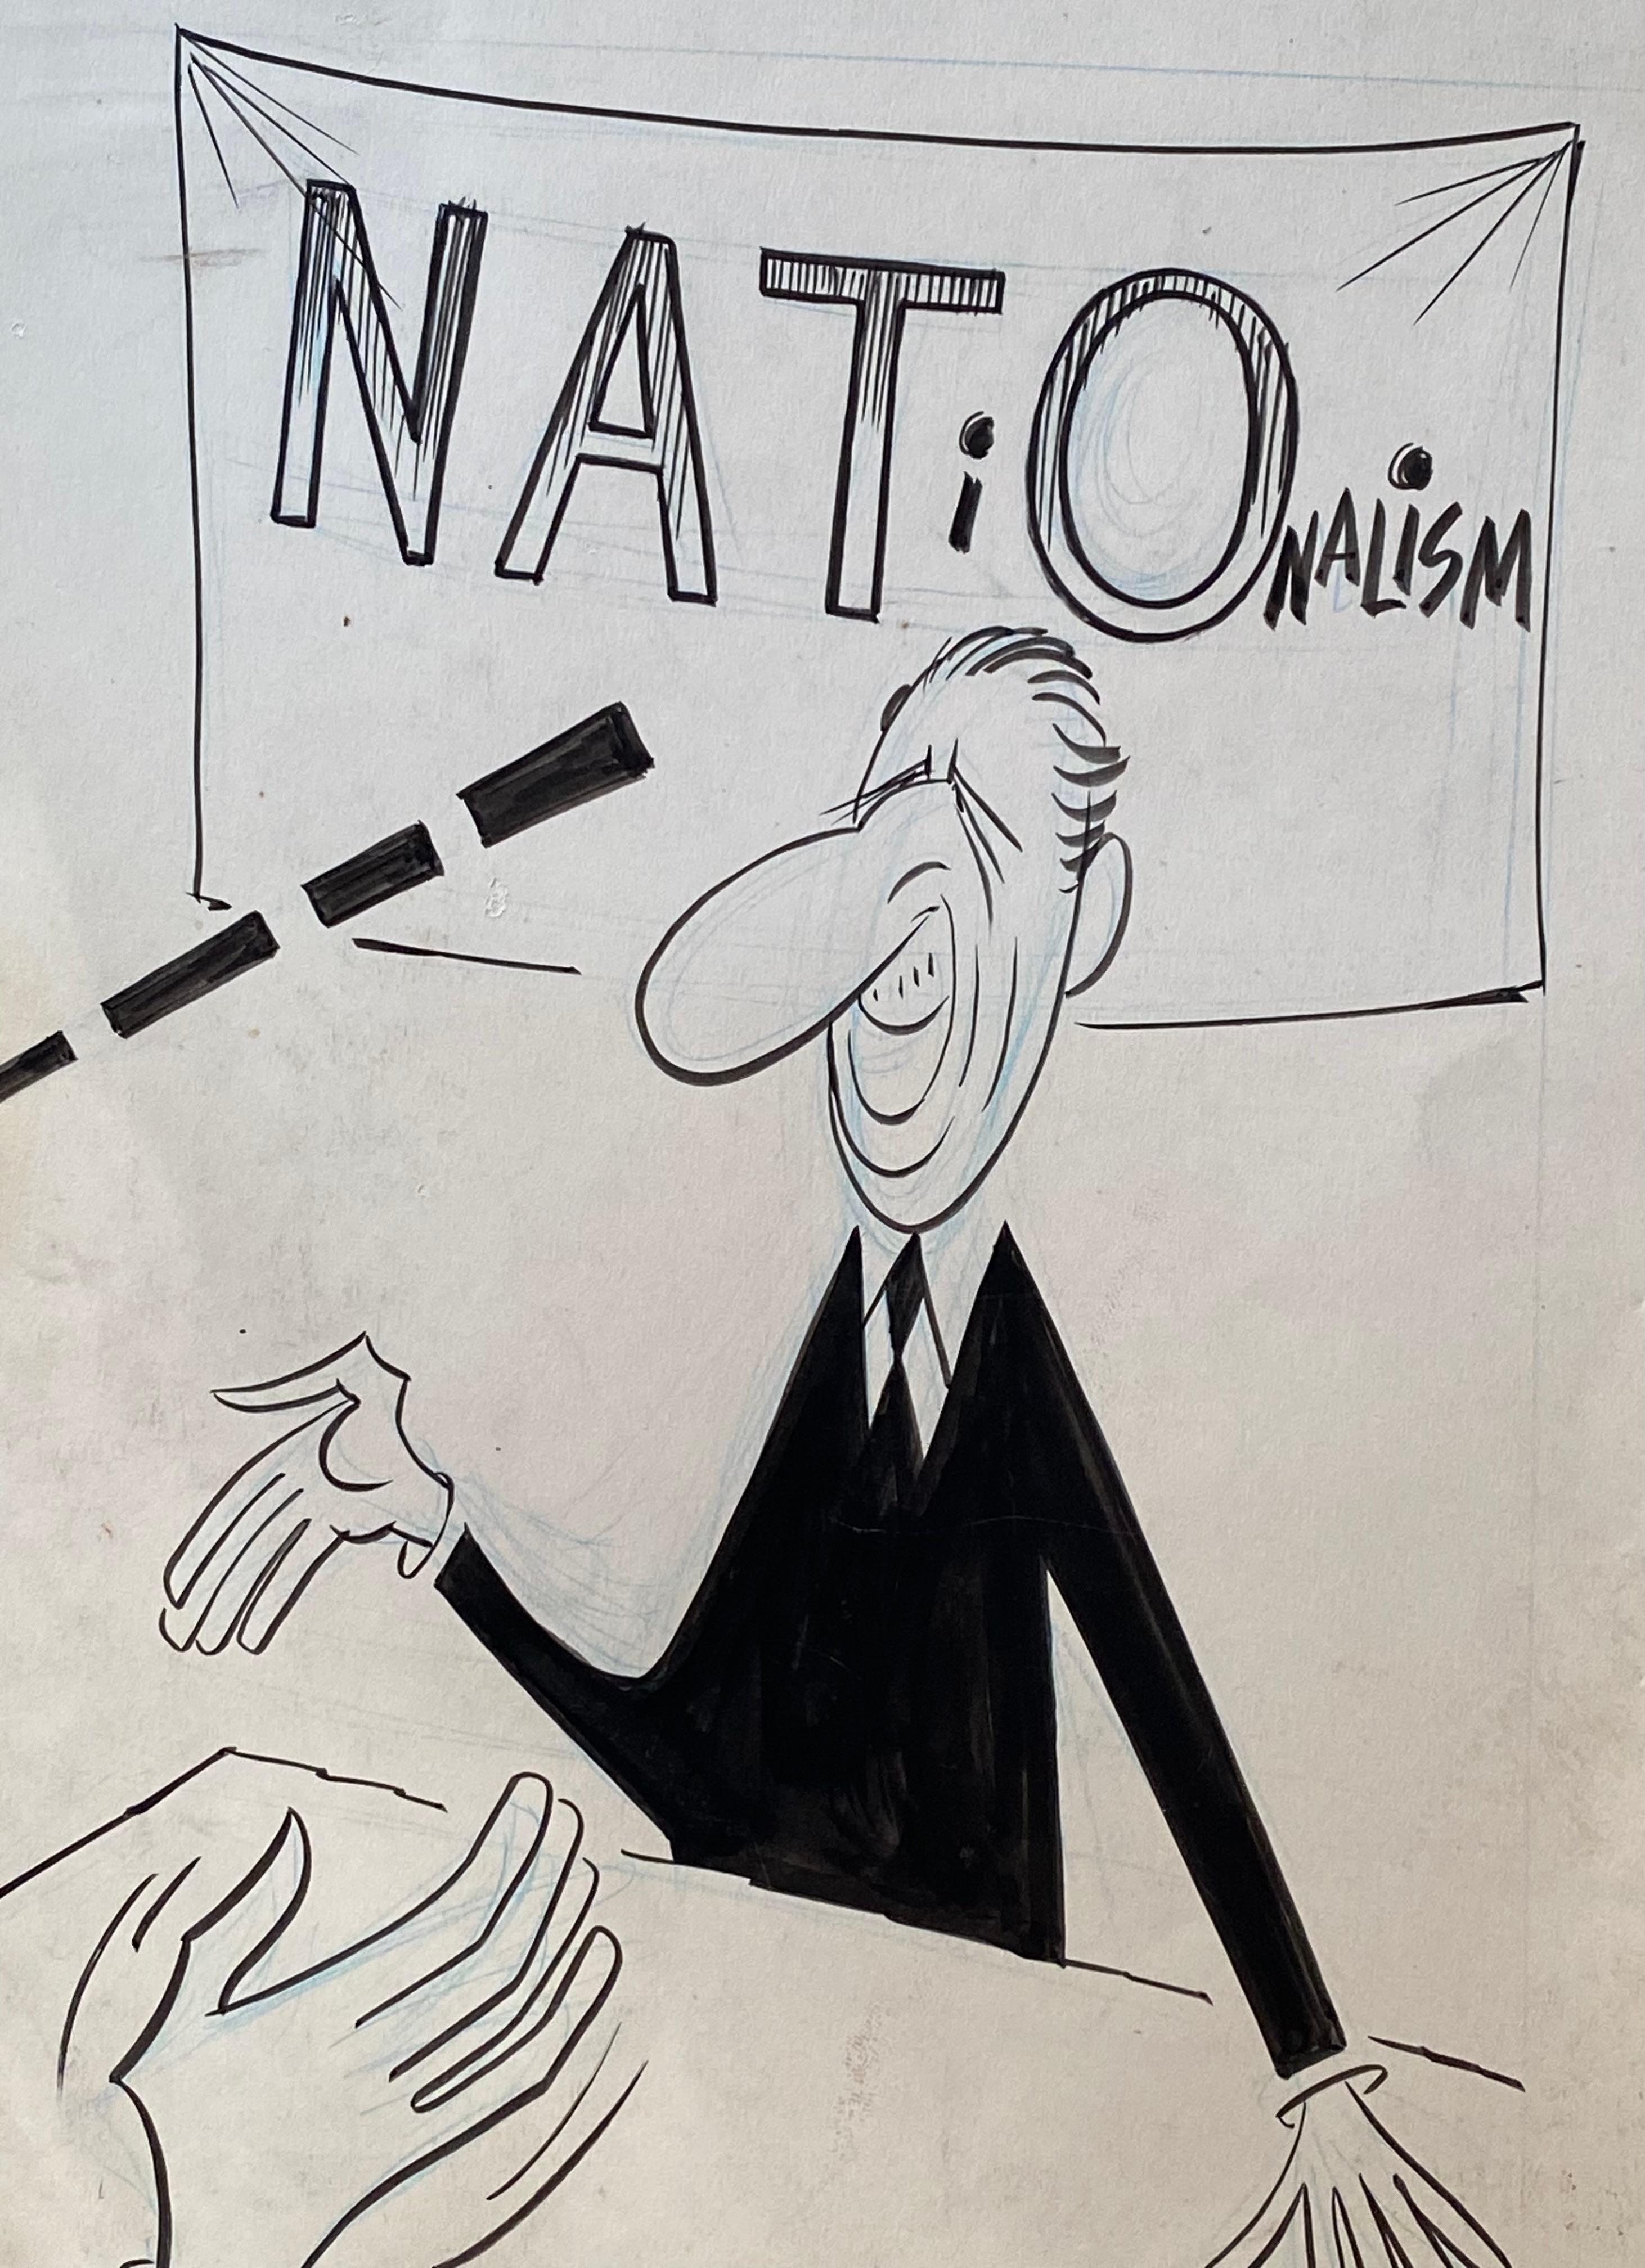 Original colored light green pencil and permanent black marker political cartoon artwork for the San Francisco Examiner newspaper. John F. Kennedy and Charles de Gaulle on NATO  and Nationalism. Signed lower right by the artist, Jim Ivey with